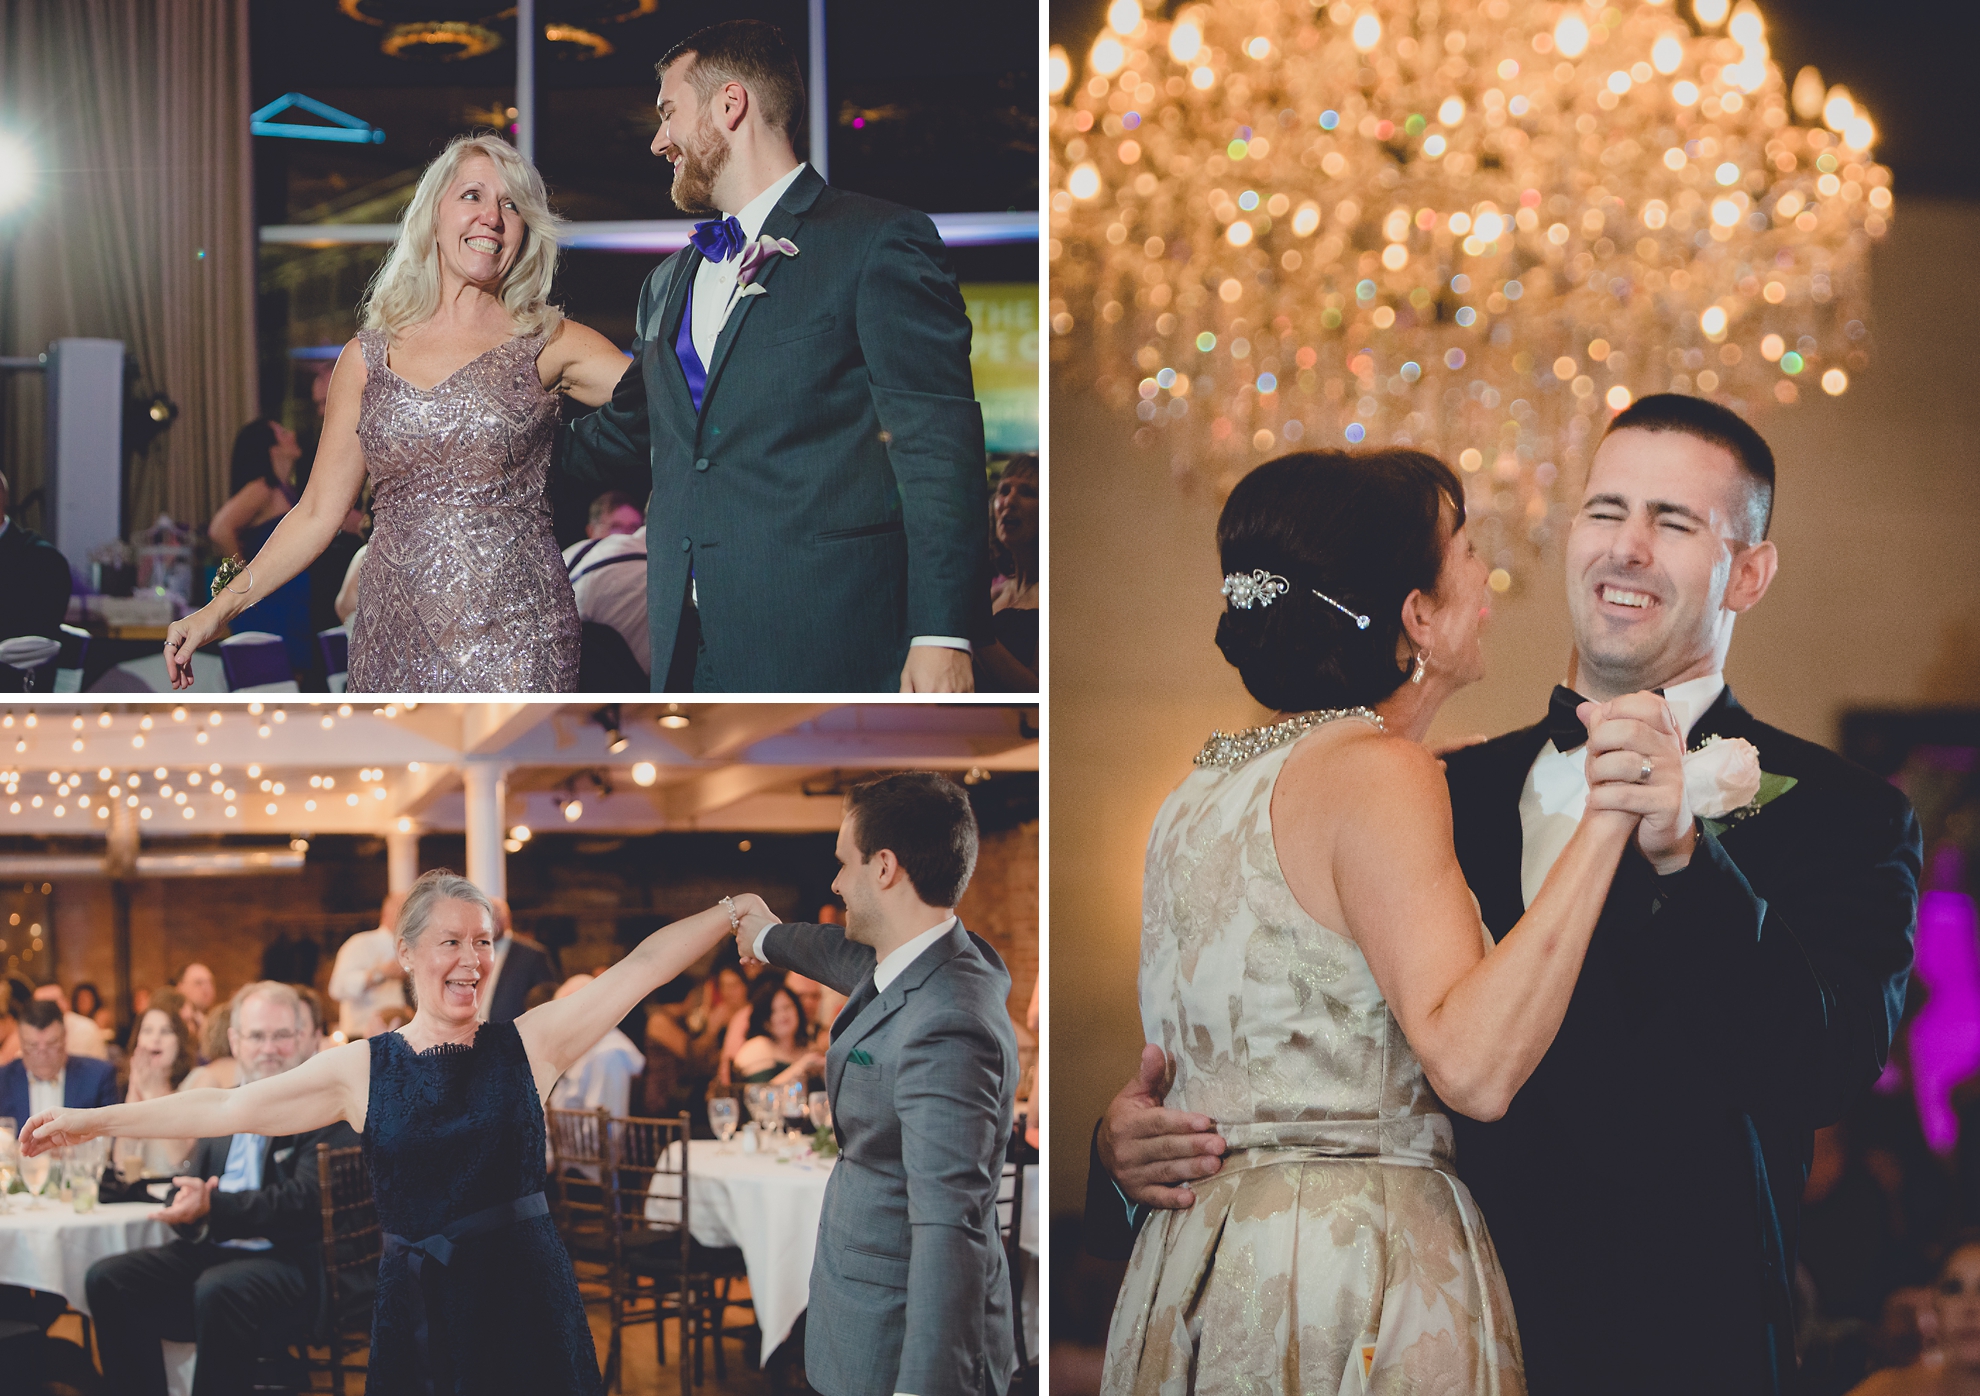 mother and groom dance at wedding reception at Statler City in Buffalo, NY